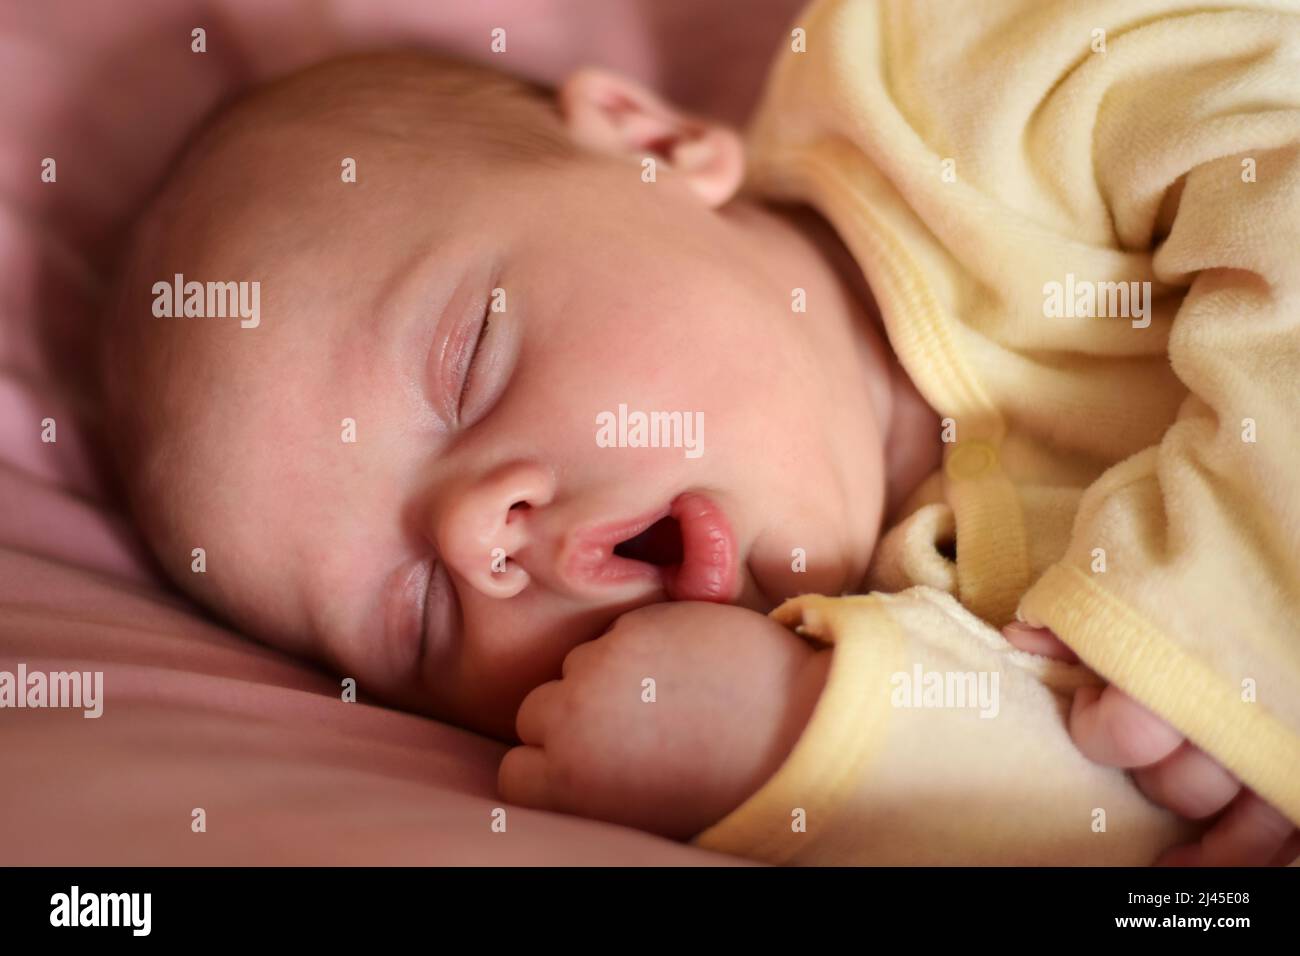 Newborn baby sleep with opened mouth. One, two week age. Infant girl sleeping or waking up while lying on purple bed at home. New life and growing up Stock Photo